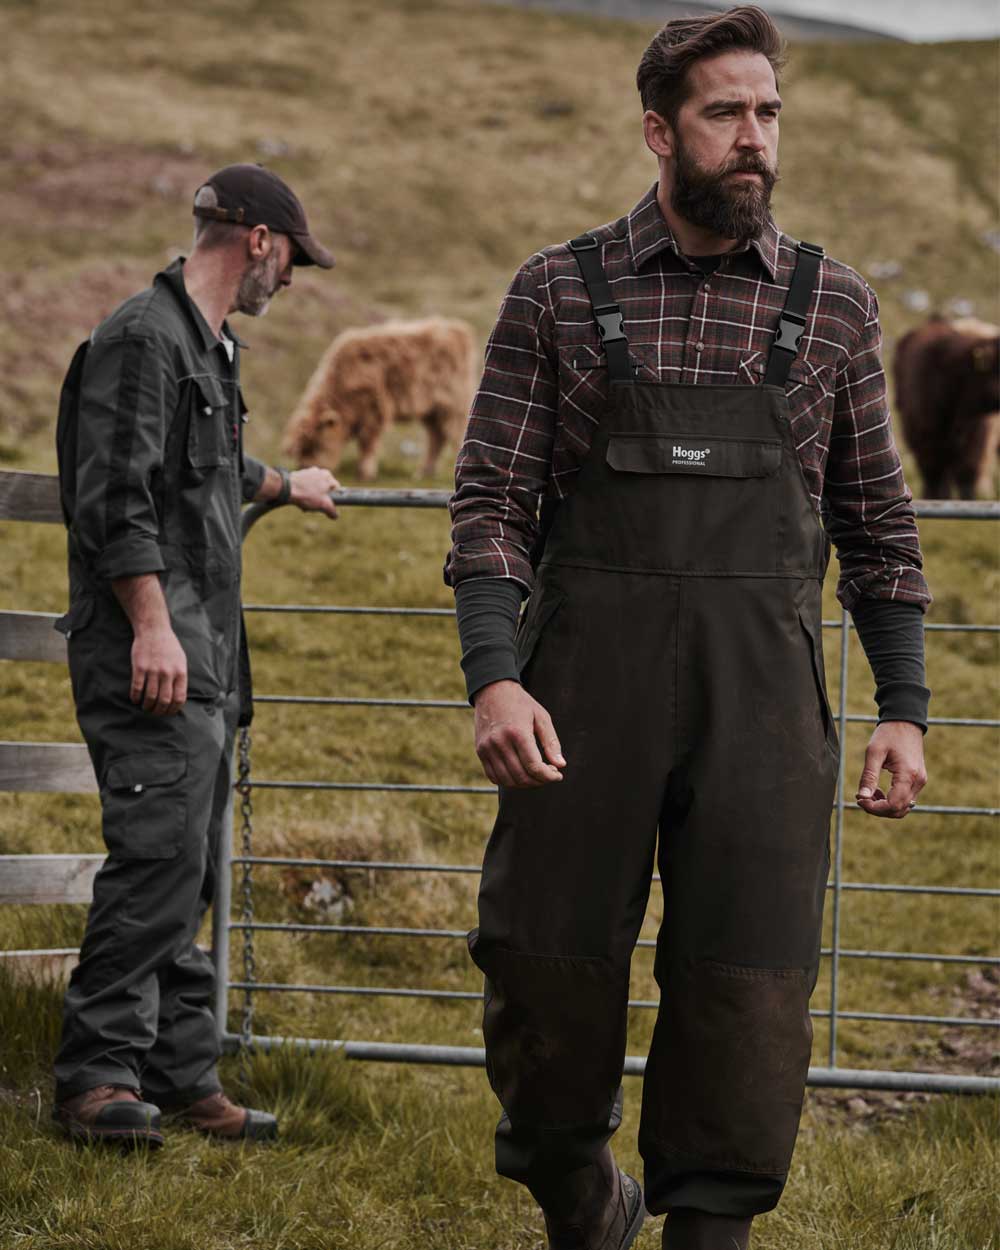 Two farmers with cattle in the background wearing hoggs professional agricultural workwear